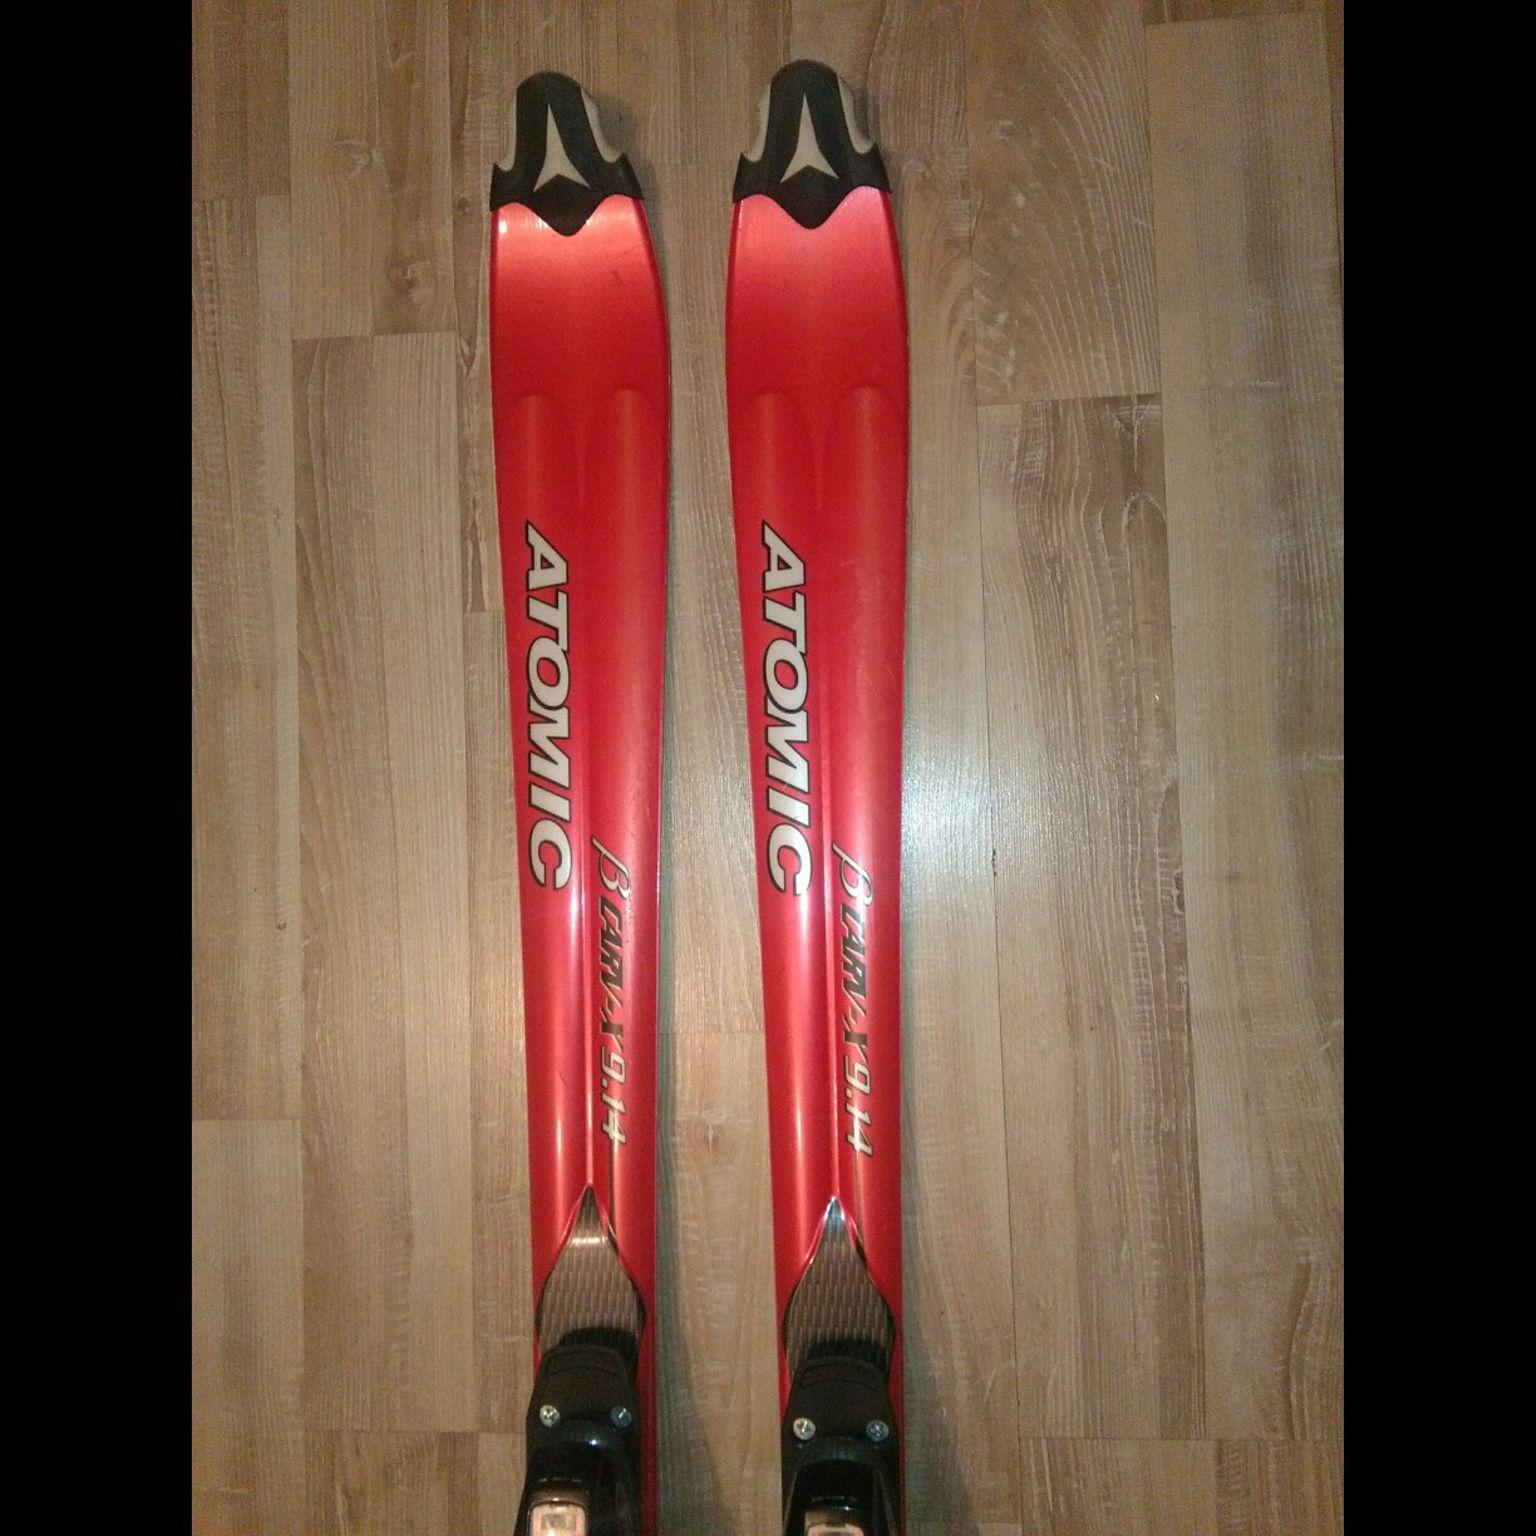 ATOMIC BETA CARV X 9.14 160 cm in 9800 Spittal an der Drau for €50.00 for  sale | Shpock